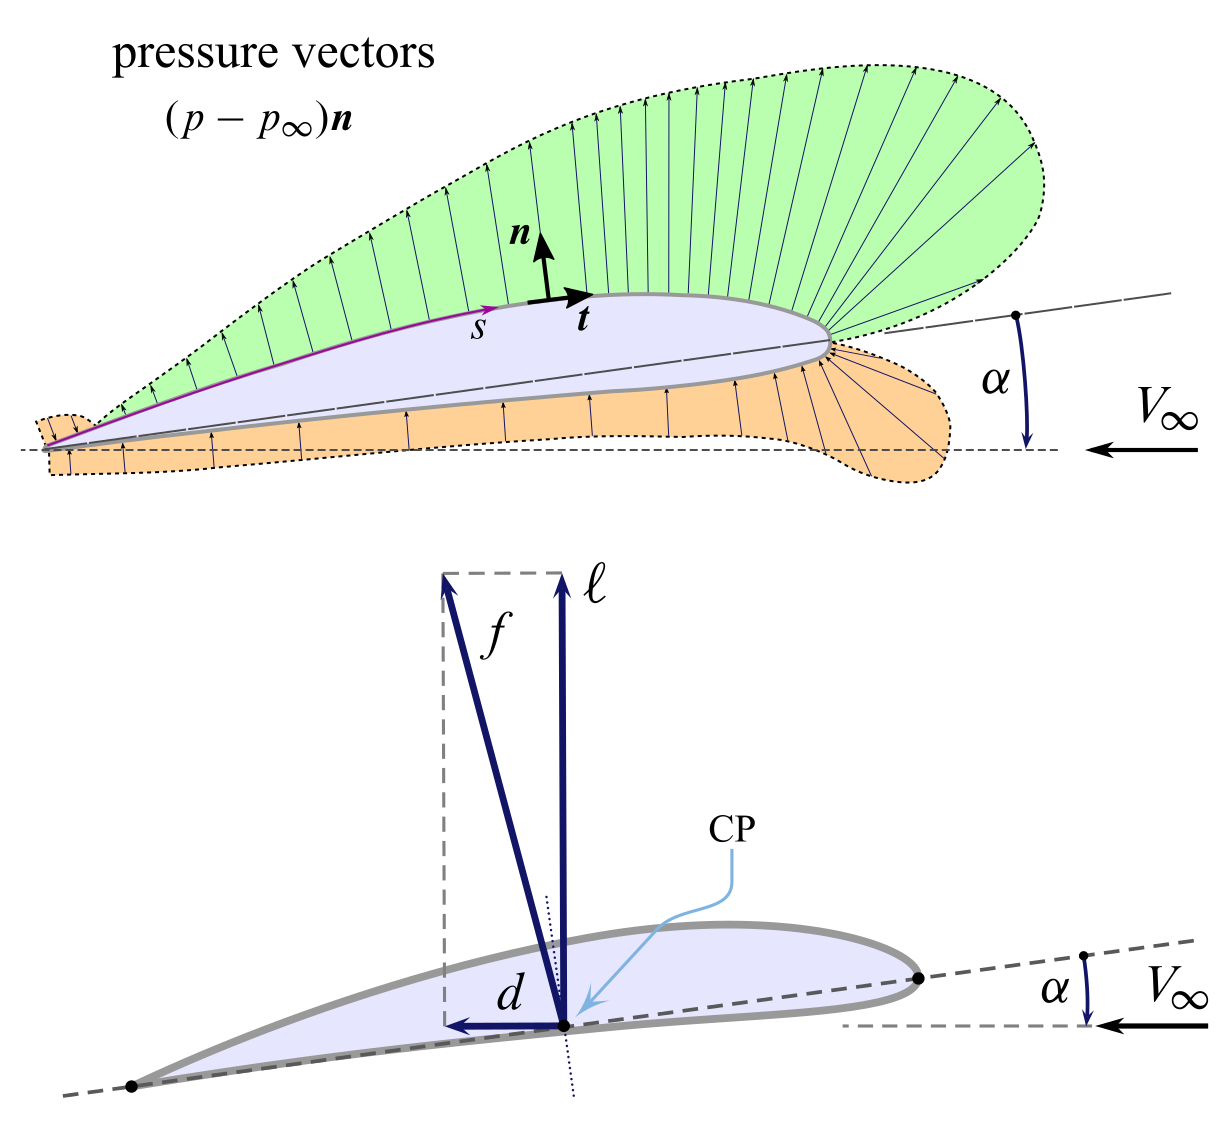 Reduction of pressure distribution over the airfoil external surface to the aerodynamic resultant force $f$ applied to the center of pressure (CP).